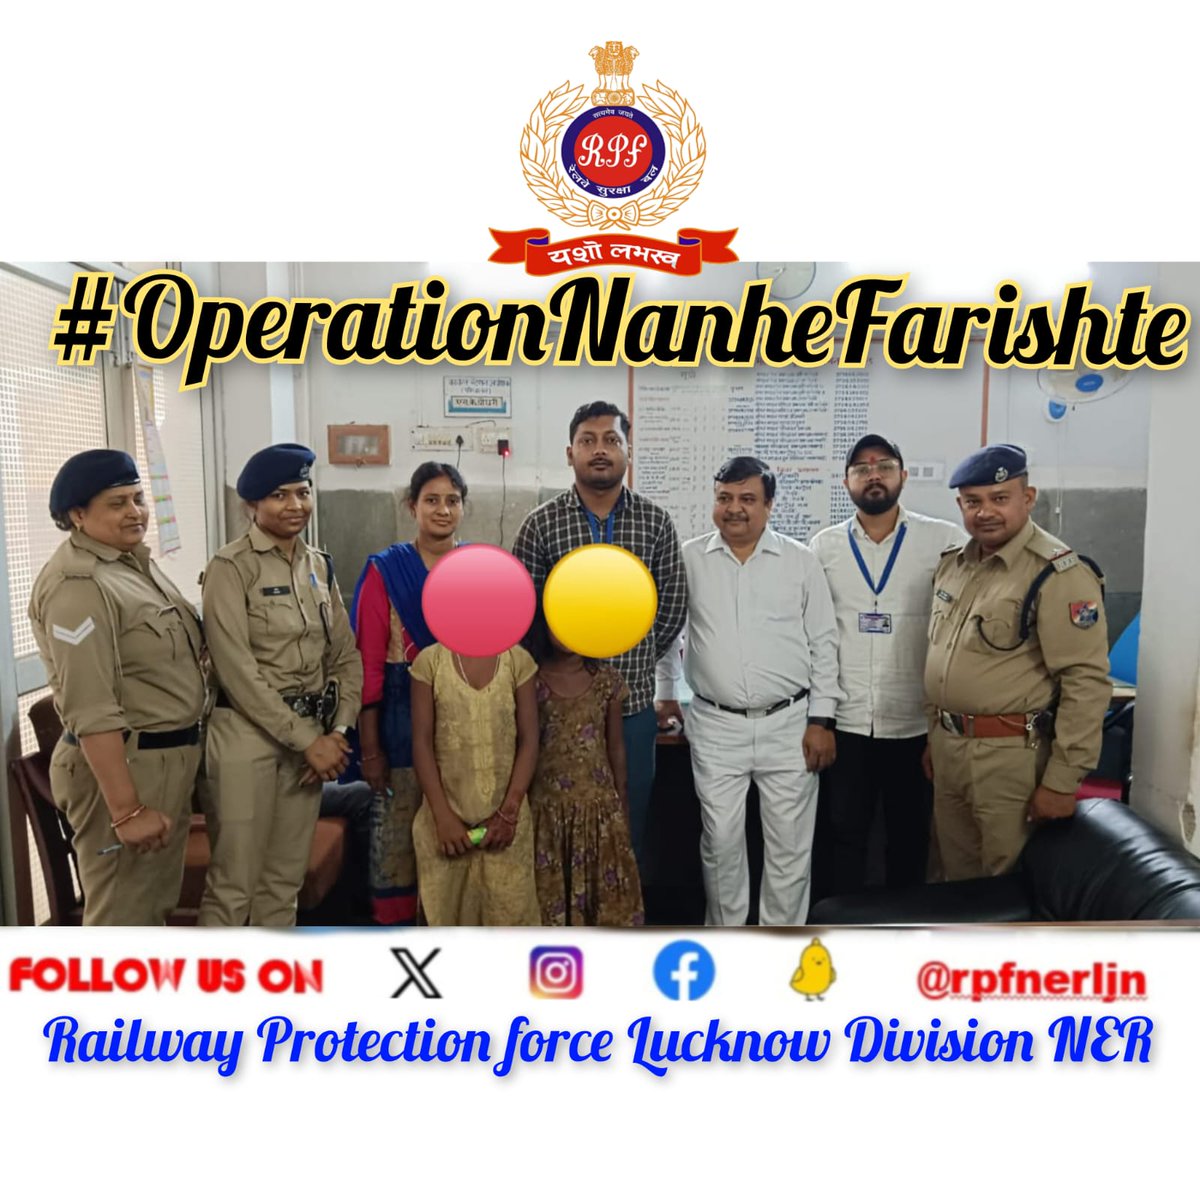 *#OperationNanheFarishte* 
'Children See Magic Because they Look For it.'
#RPF Lucknow Jn., On a Complaint through Railmadad, Rescued Two minor  (age 12 yrs & 10 yr old ) in Train 15007 & Later Handed her over to Child line on 18.05.24
@RPF_INDIA
@rpfner
@drmljn
@rpfpcljn